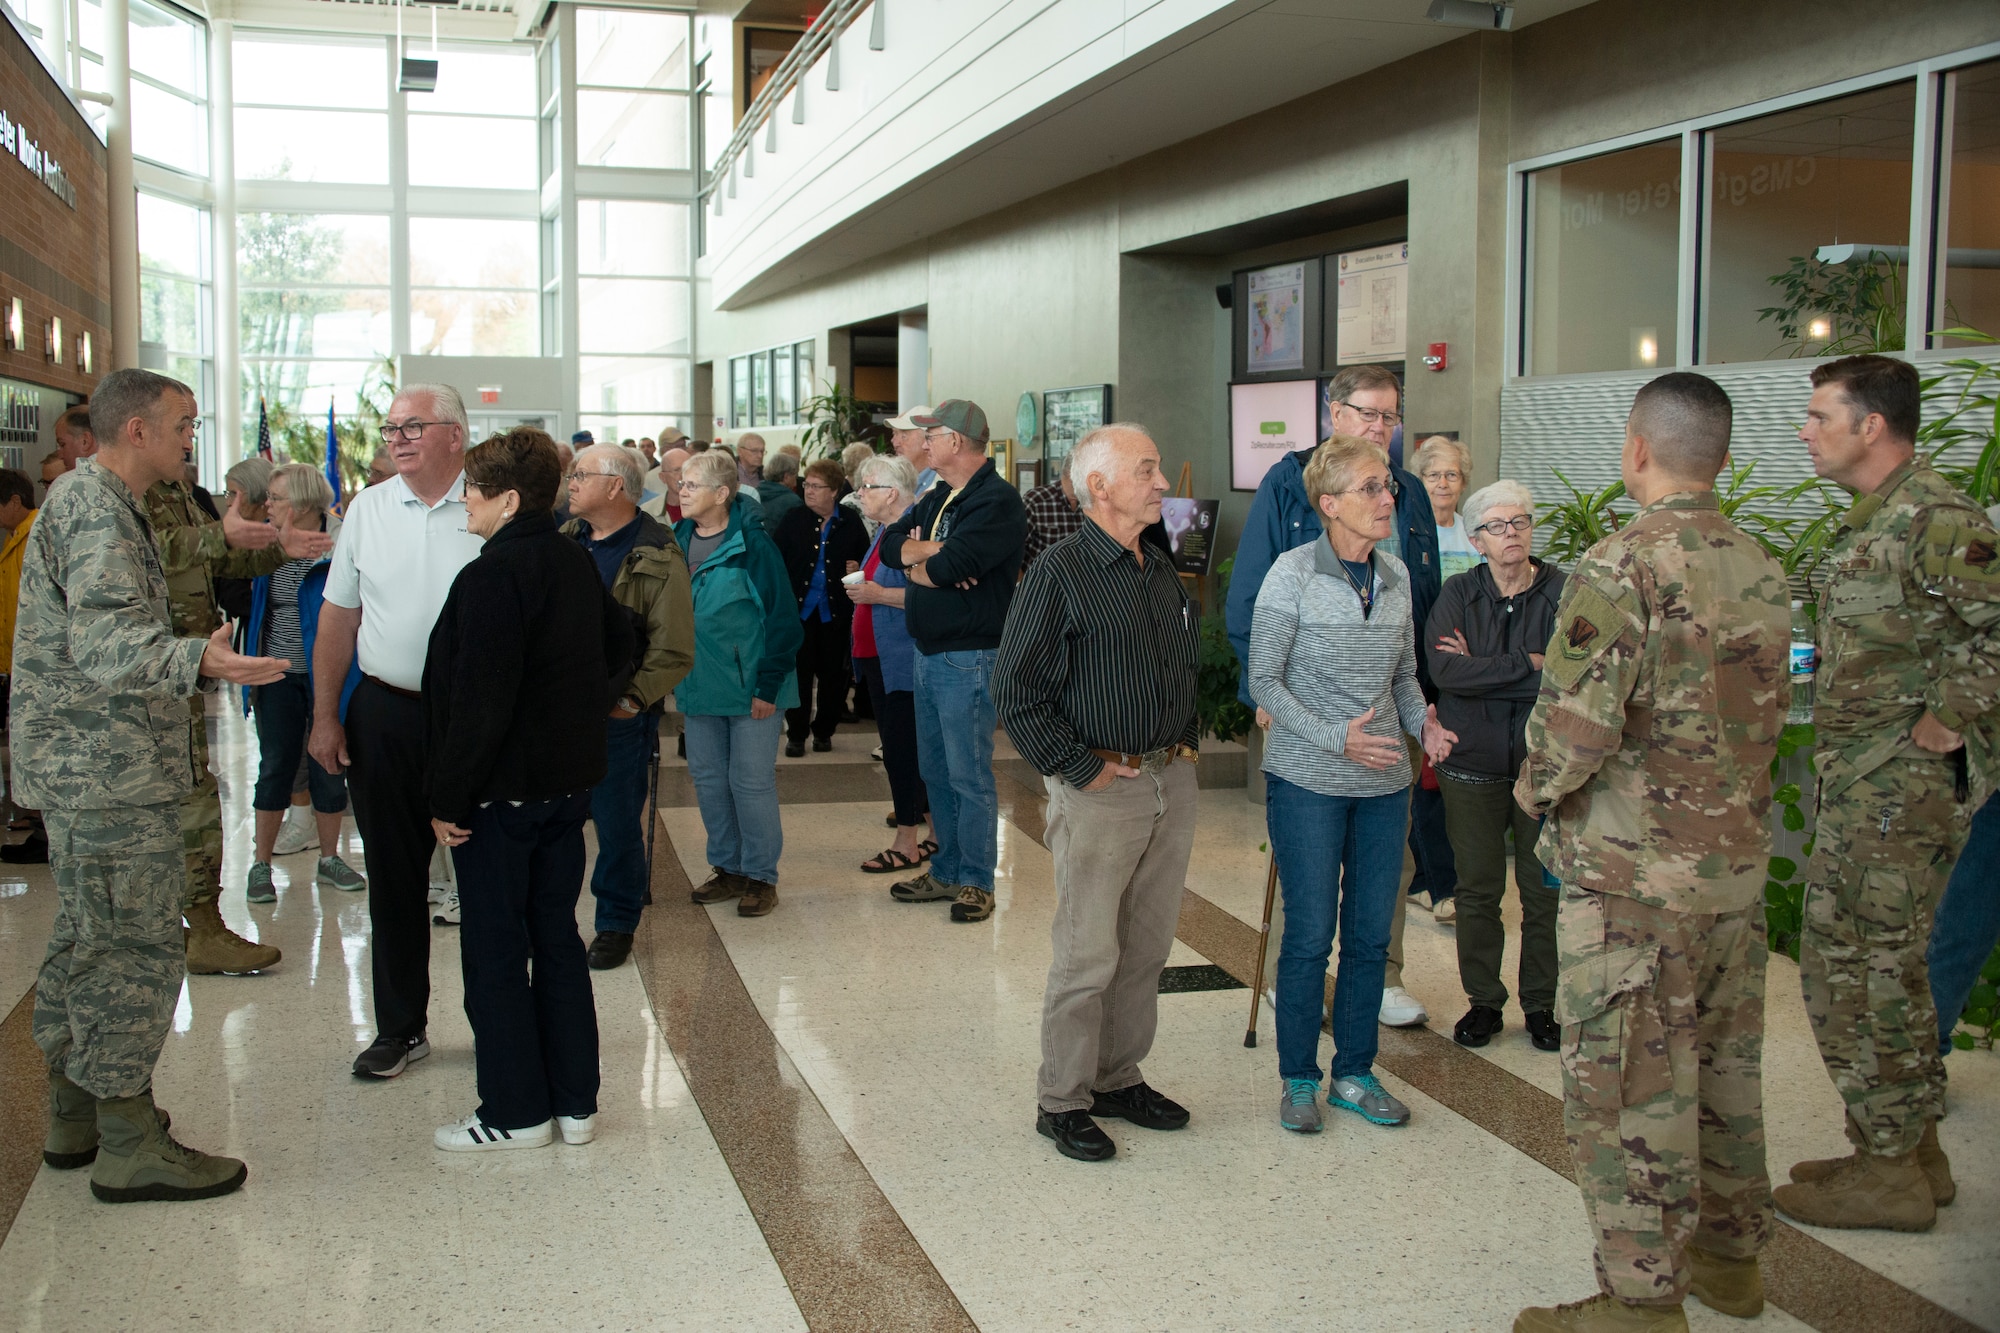 Visitors from Rochester, Minnesota, speak with Airmen in the 557th Weather Wing’s atrium at Offutt Air Force Base, Nebraska, Sept. 19, 2019. The visit to Offutt AFB was a surprise as part of a three day mystery tour. (U.S. Air Force photo by Paul Shirk)